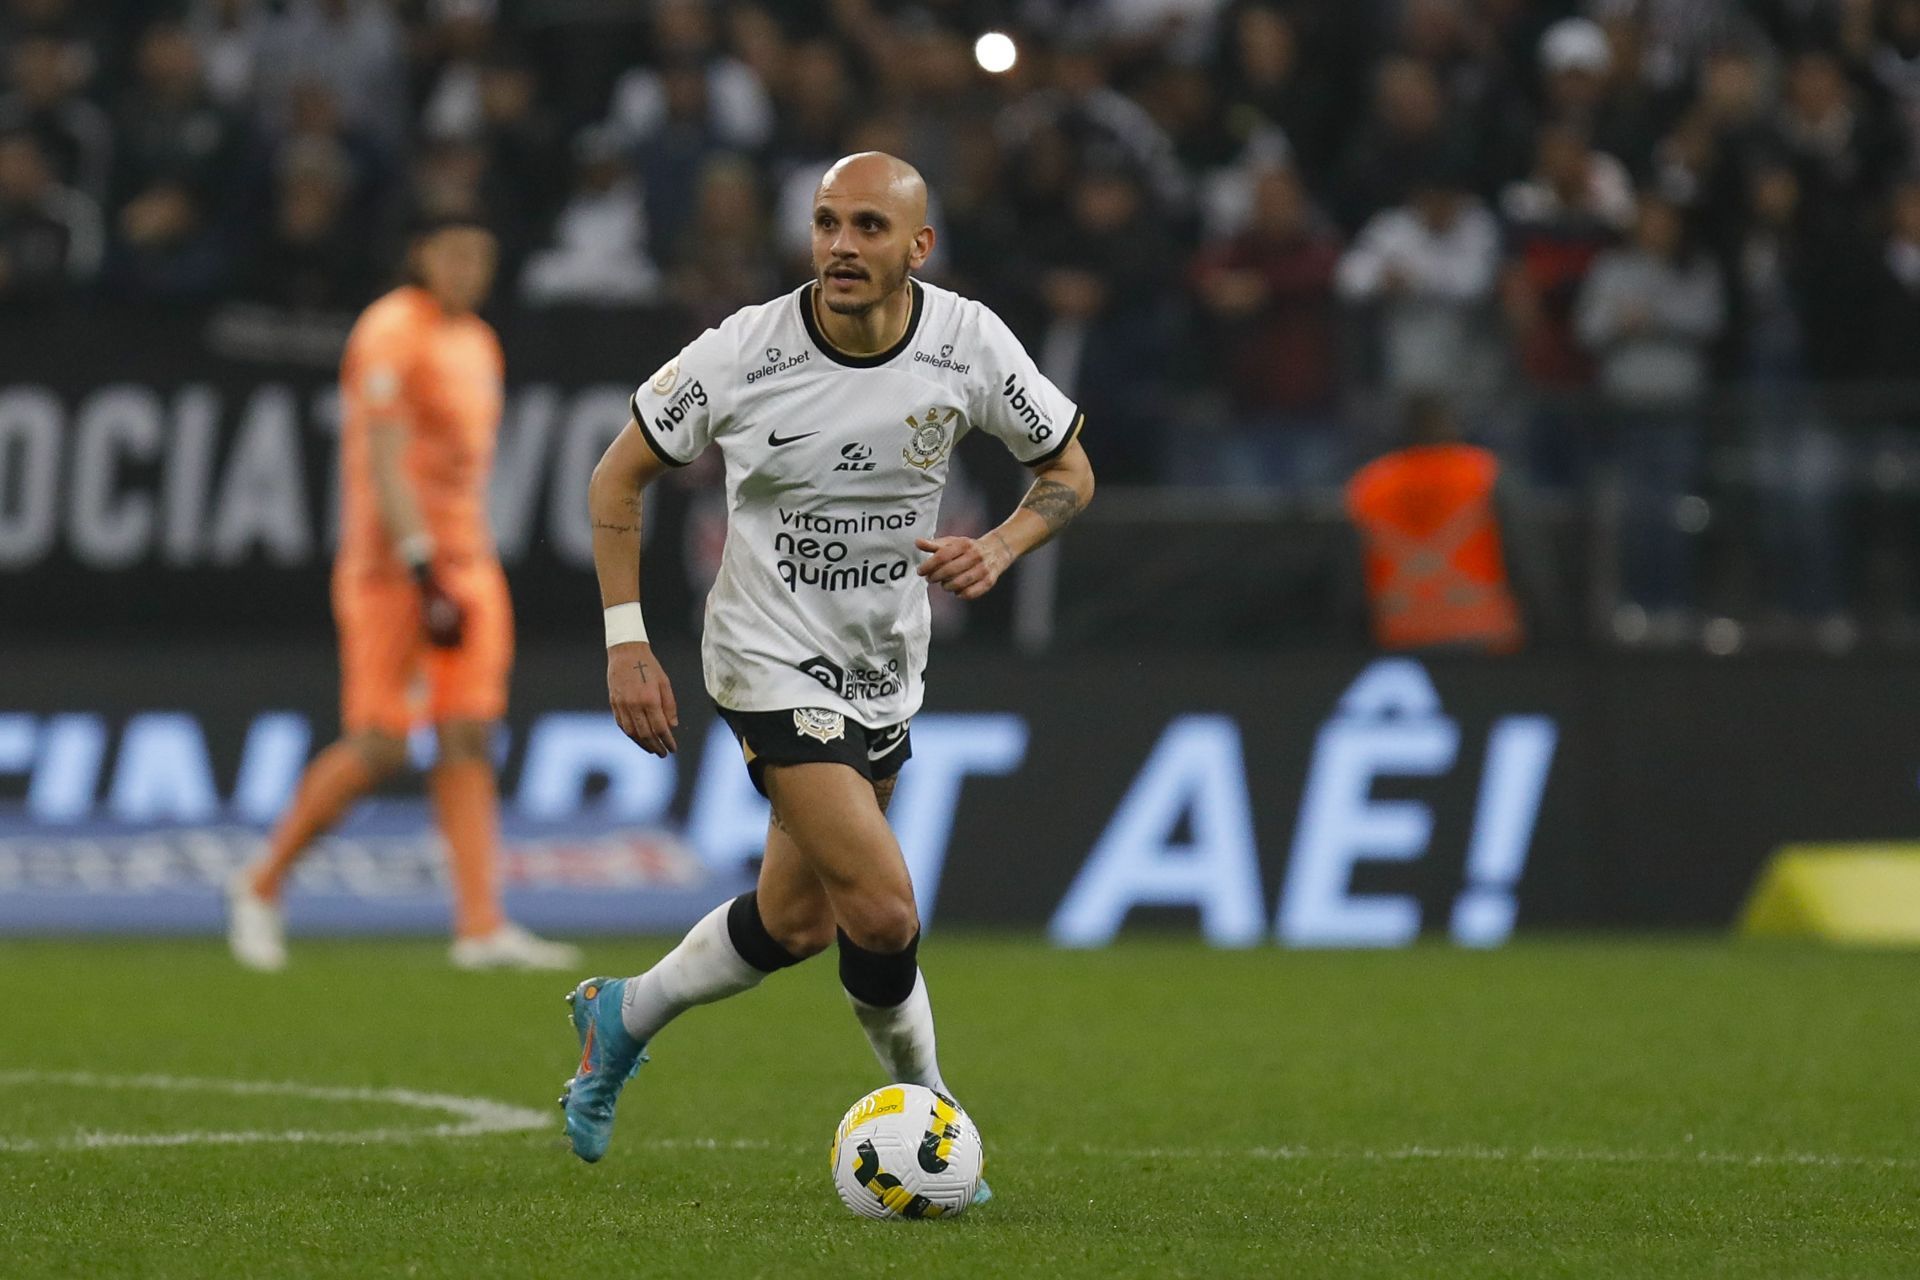 Corinthians and Santos meet in the Copa do Brasil fixture on Wednesday